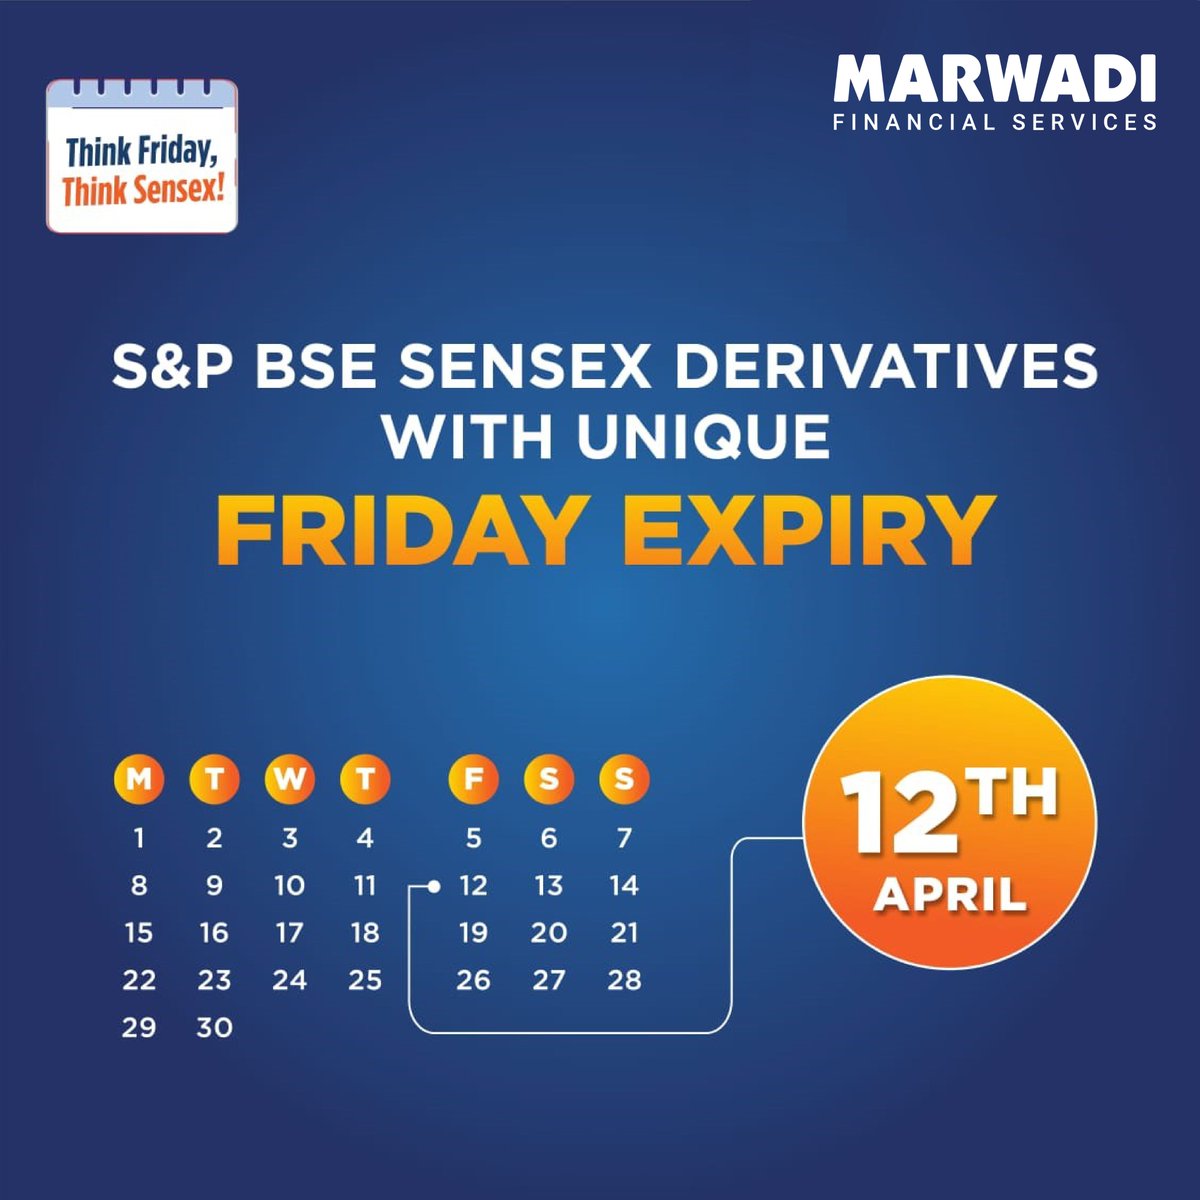 Think Friday, Think Sensex!
@BSEIndia

#bseindia #bse